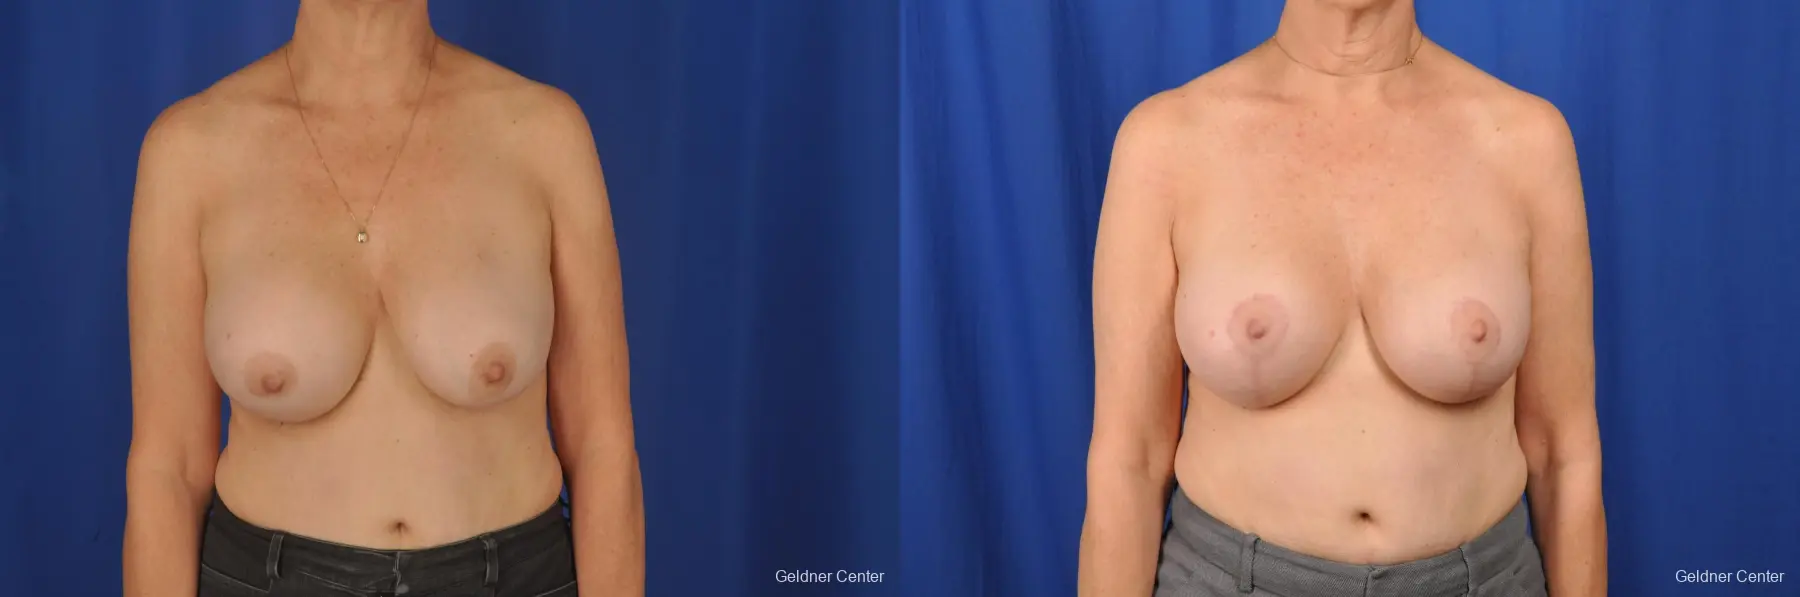 Breast Lift Hinsdale, Chicago 2058 - Before and After 1